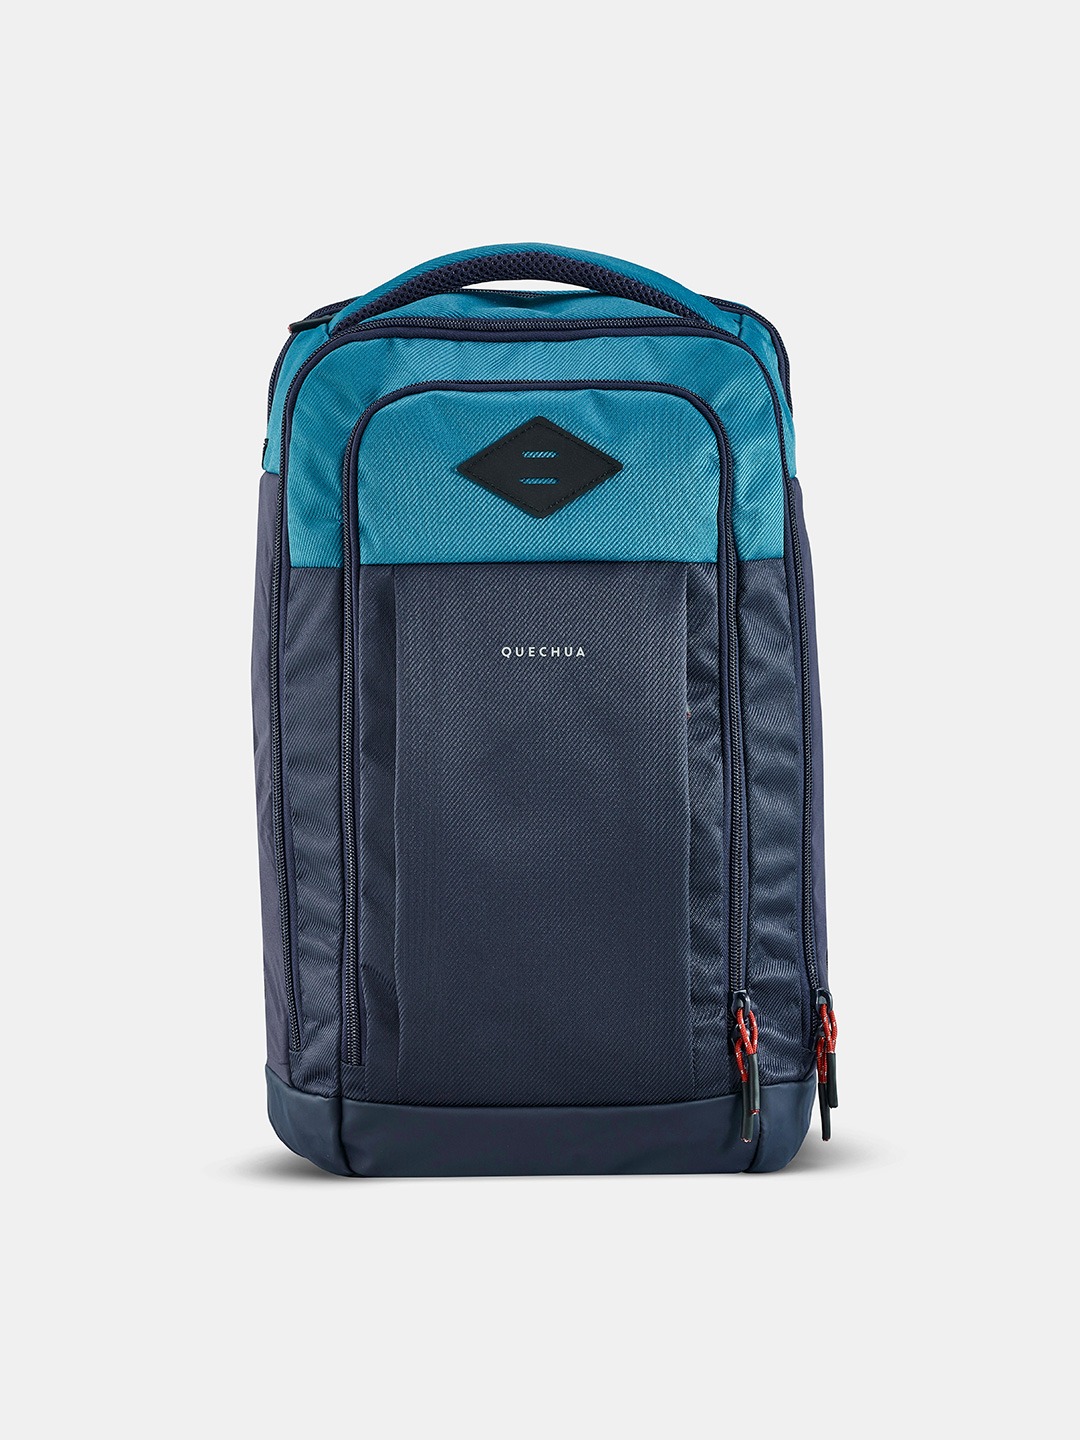 Accessories Backpacks | Quechua By Decathlon NH Escape 500 Unisex Blue & Navy Blue Colourblocked Hiking Backpack - TR69240